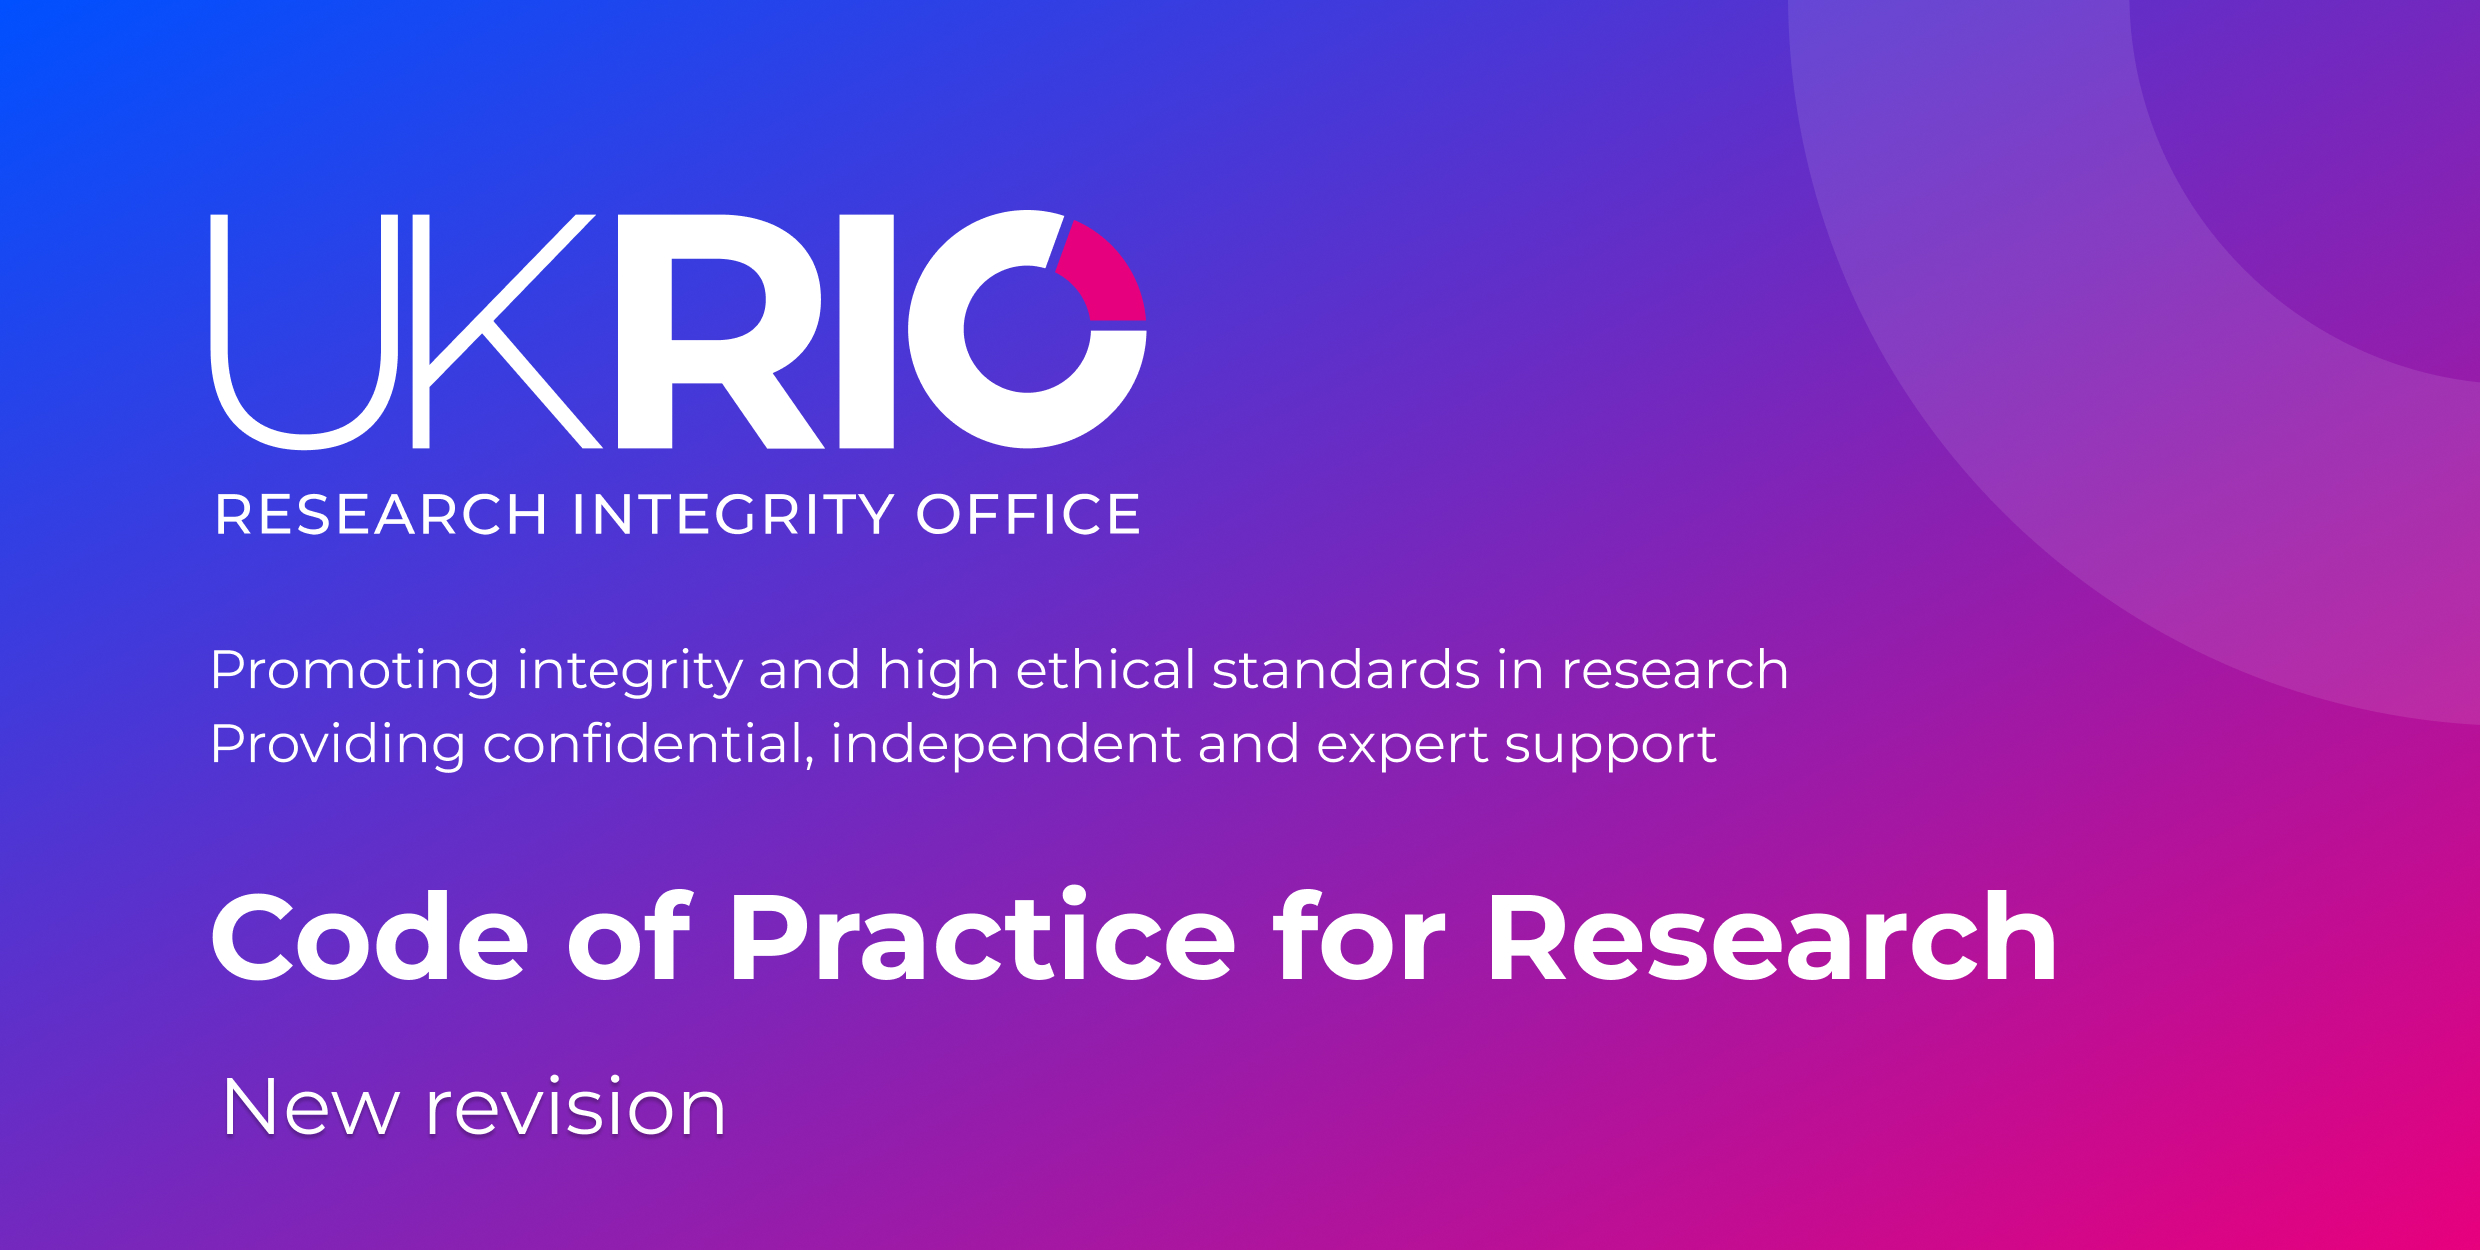 New revision of Code of Practice for Research